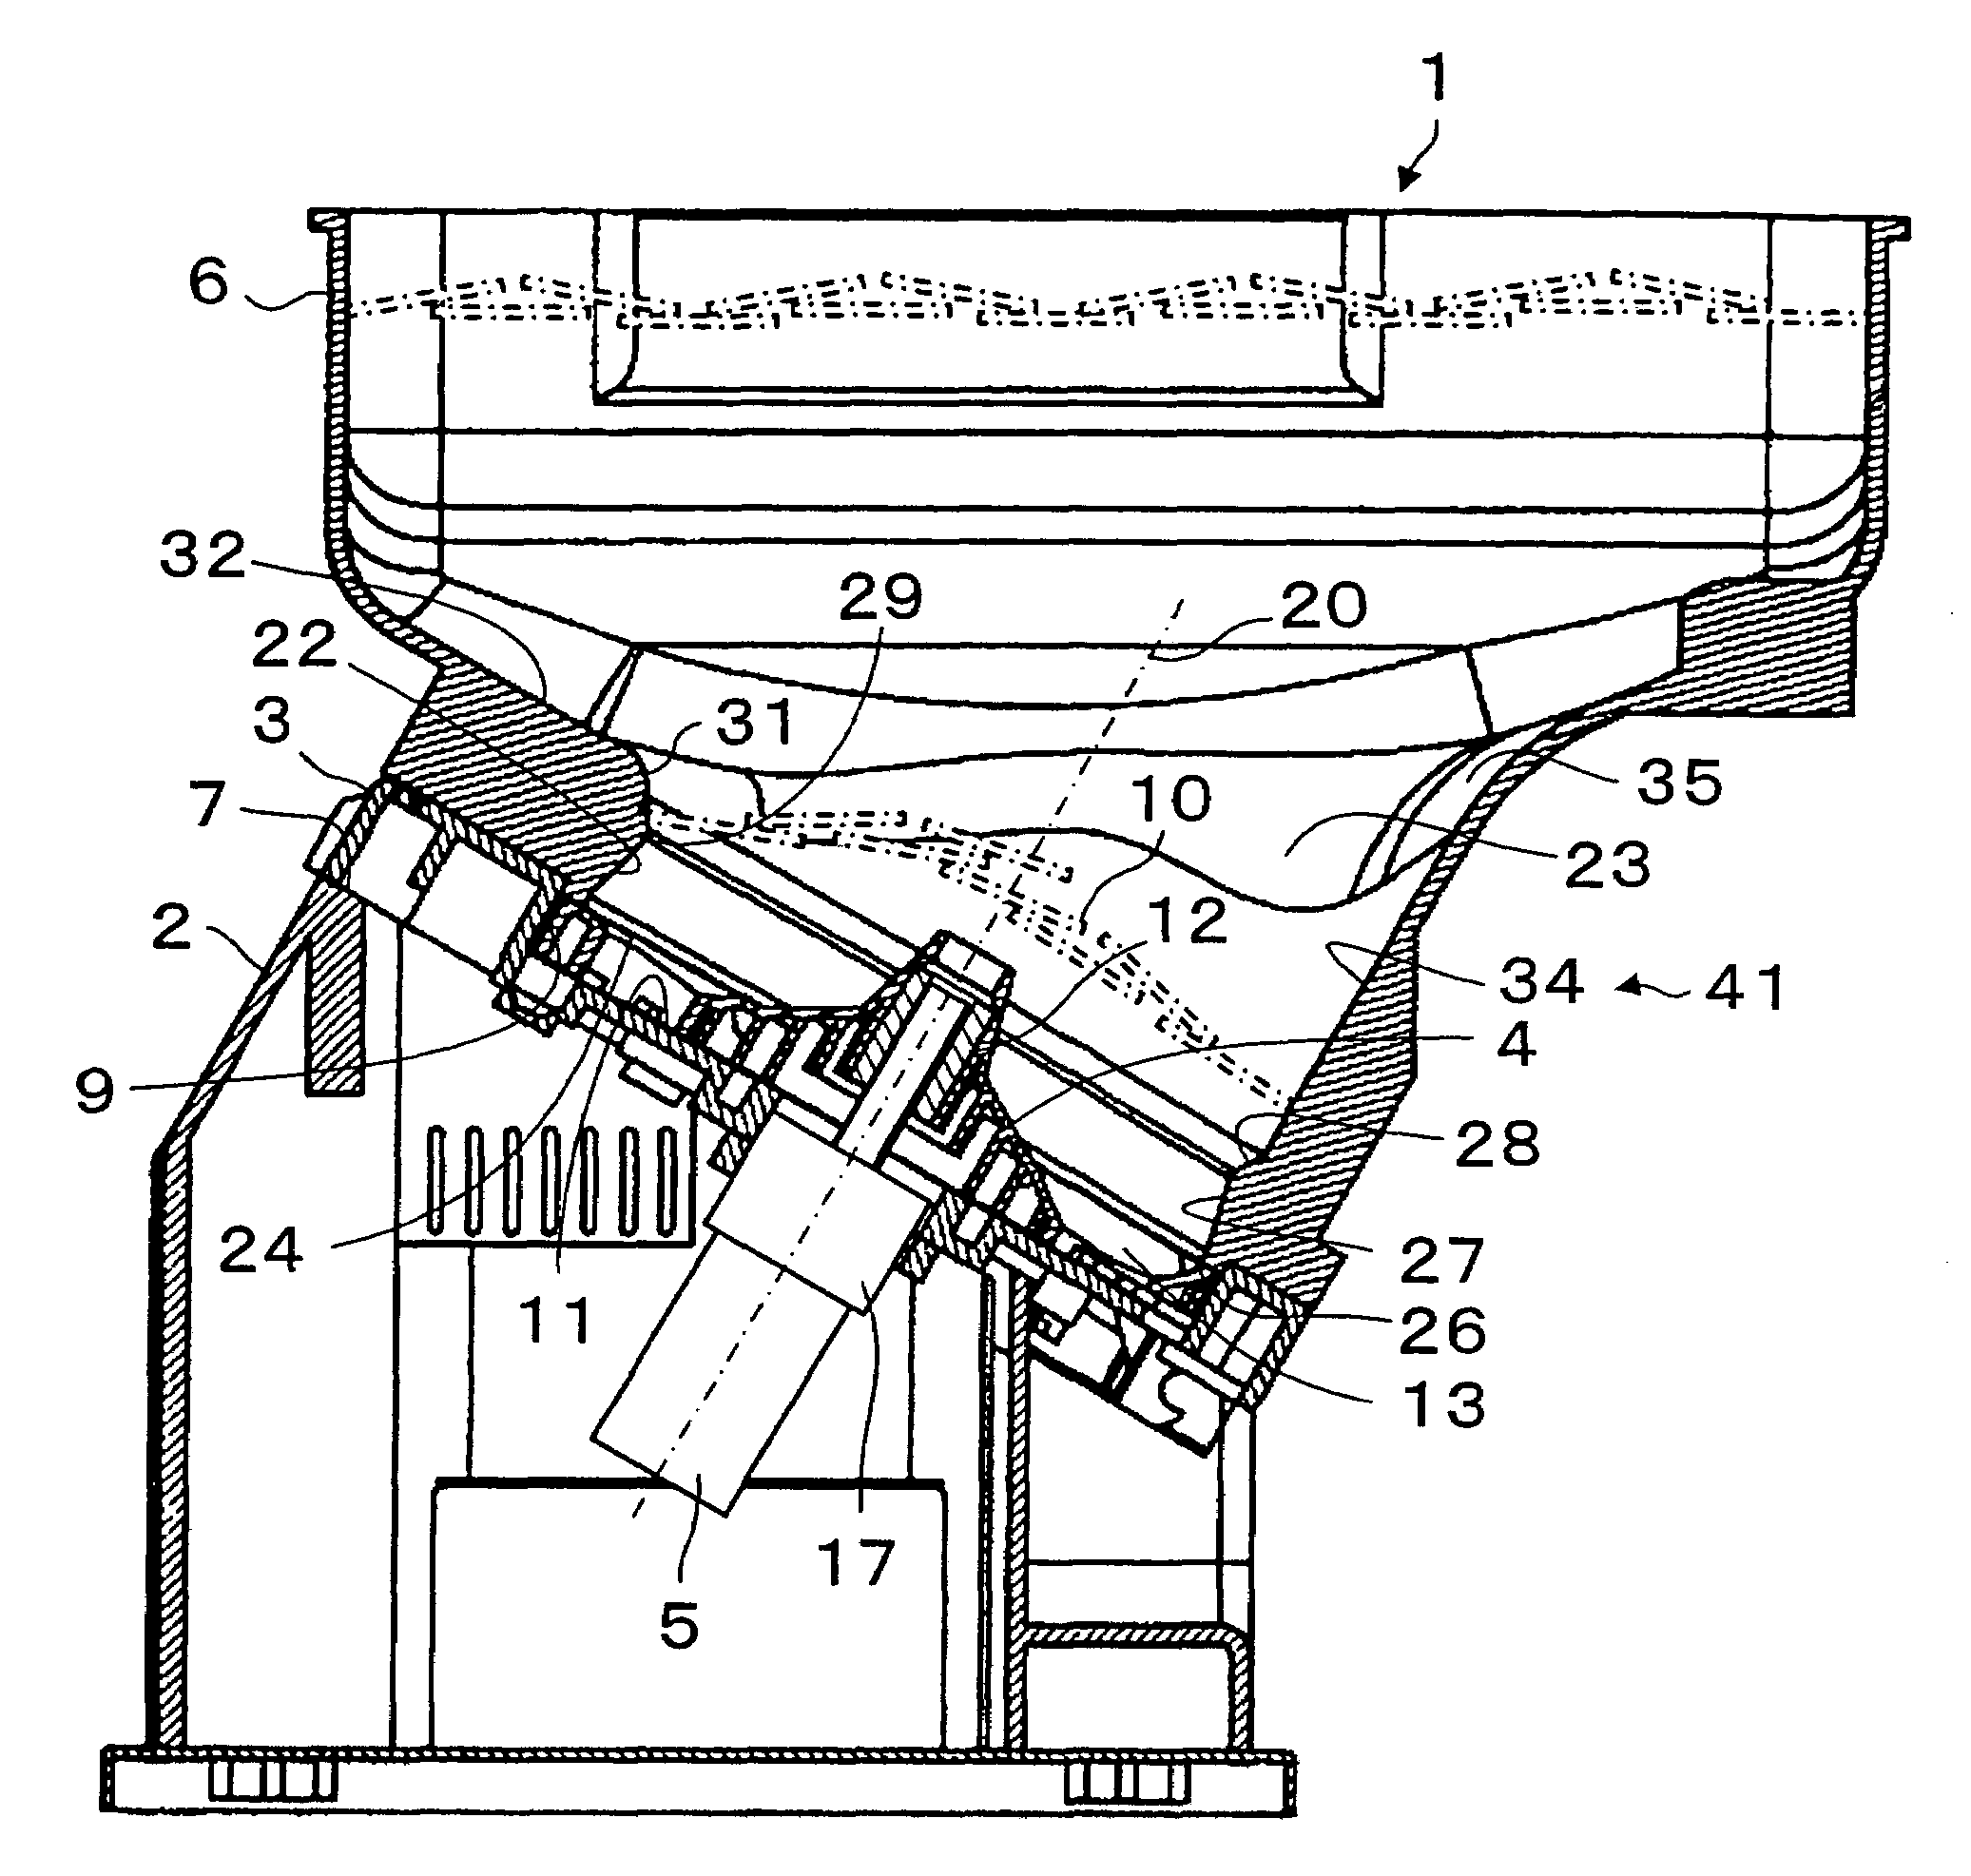 Token dispensing device with decreased loading on a token dispensing disk